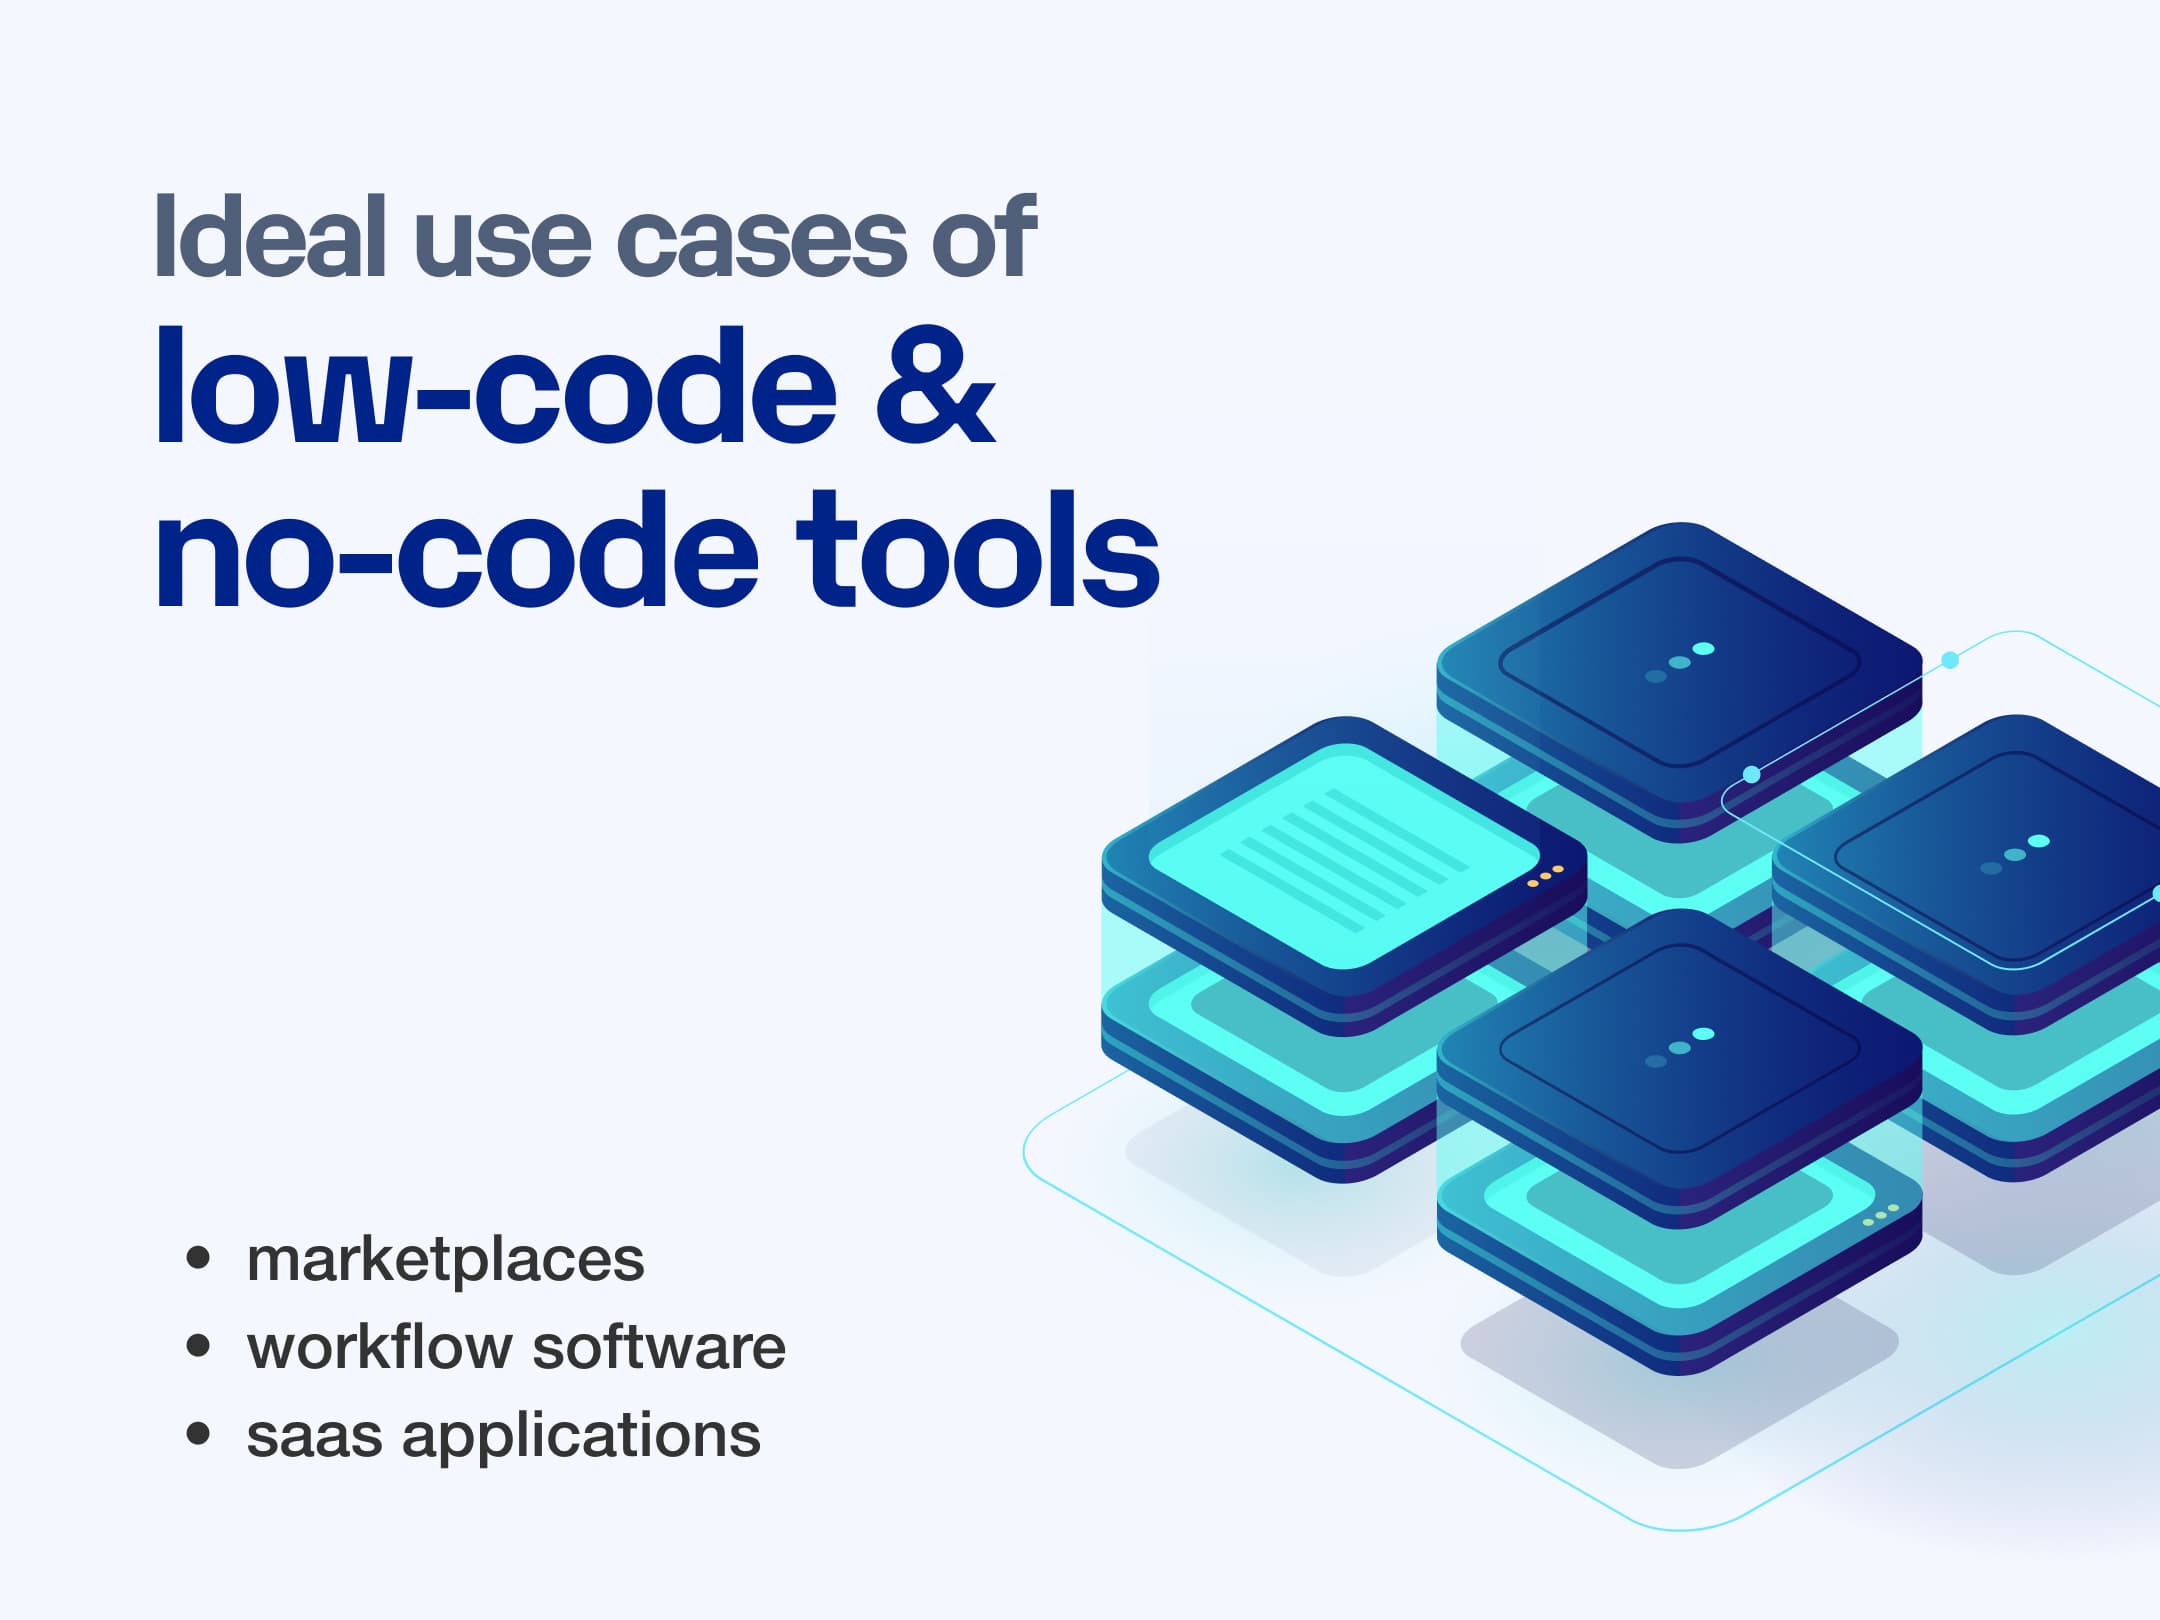 Ideal Uses of Low-Code & No-Code Tools